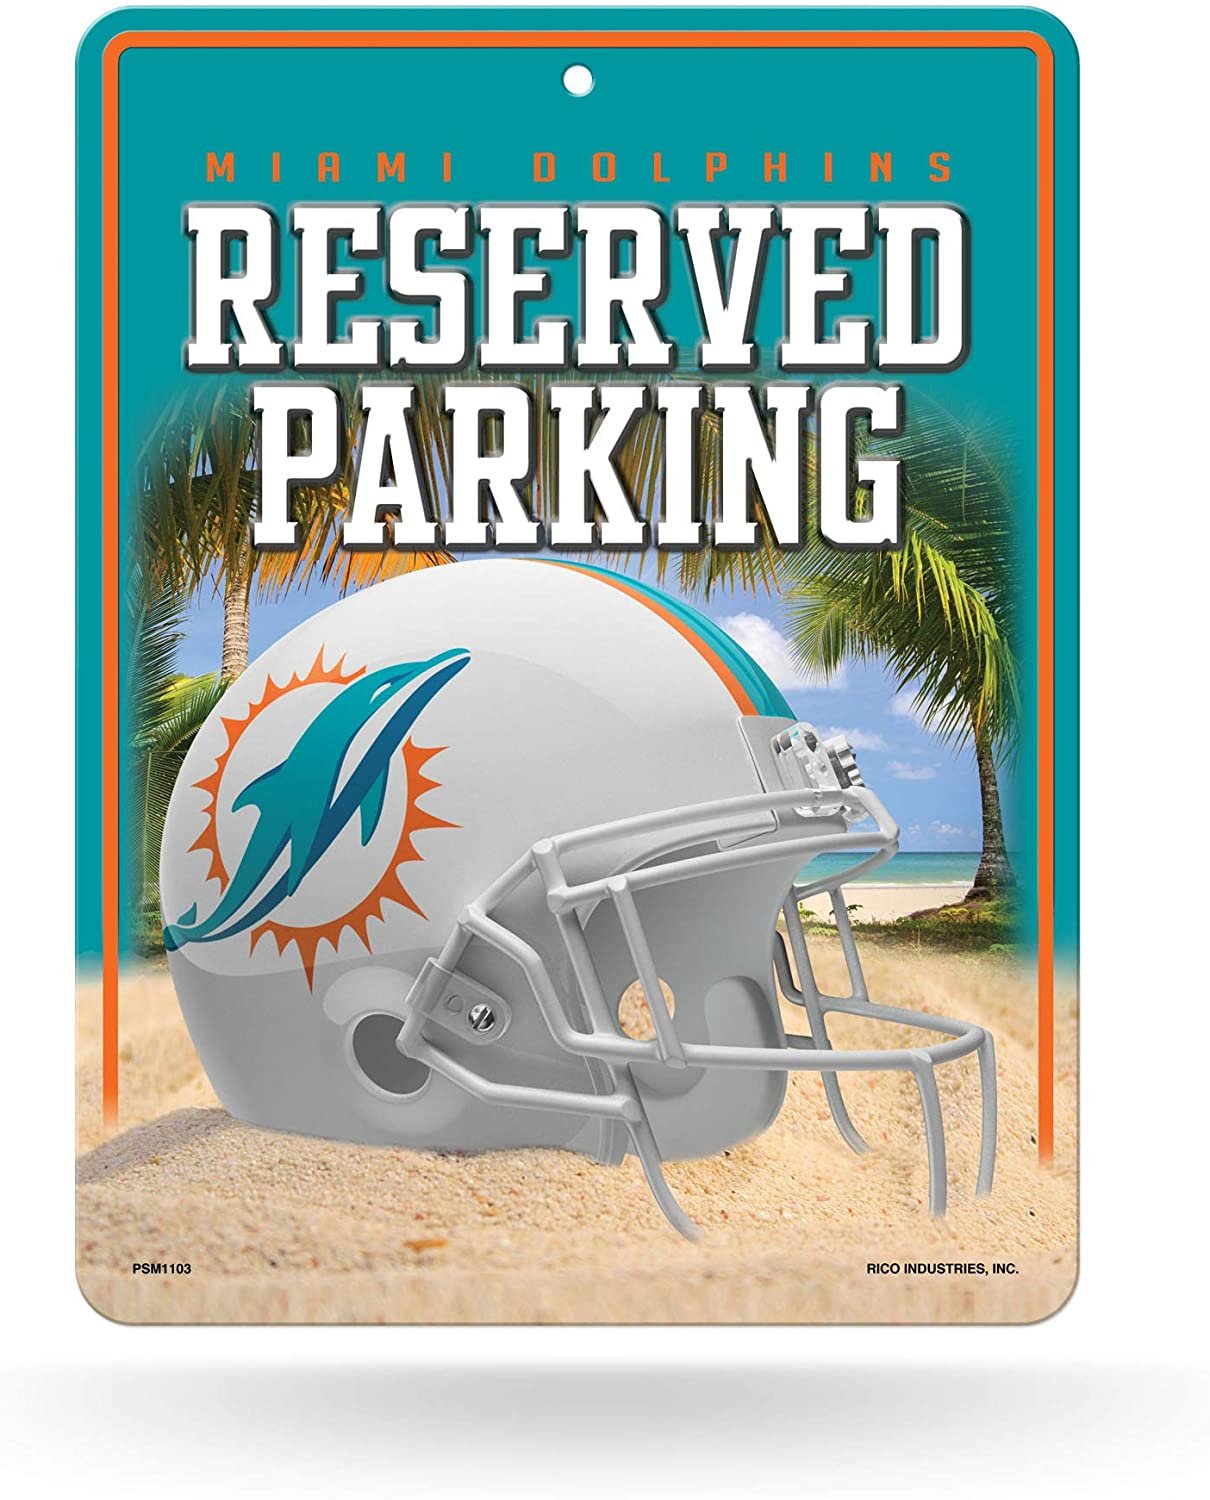 Miami Dolphins Metal Parking Novelty Wall Sign 8.5 x 11 Inch